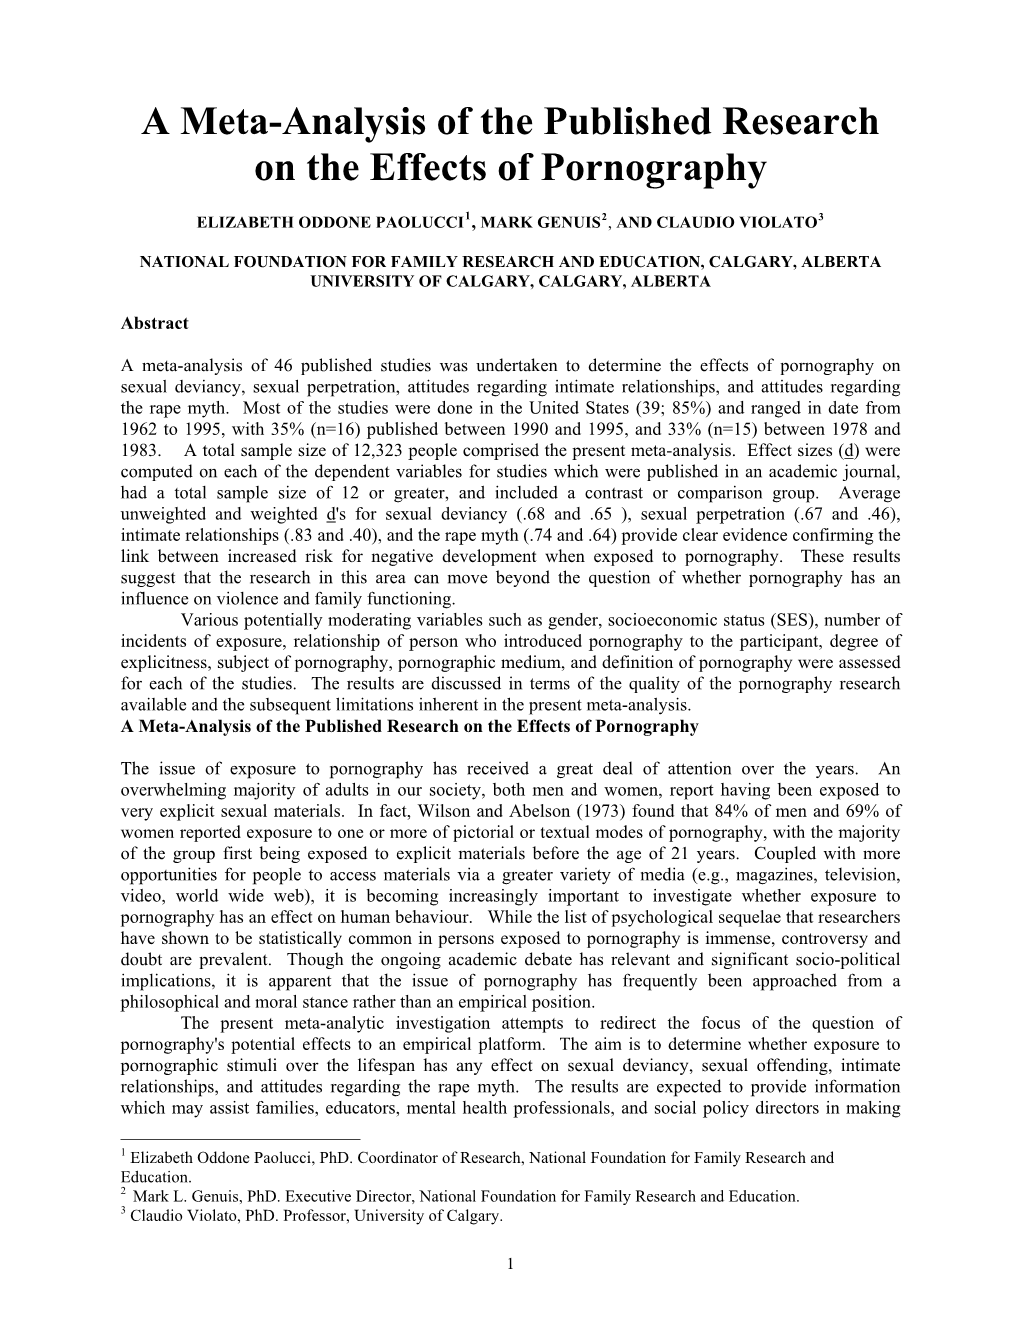 Running Head: EFFECTS of PORNOGRAPHY